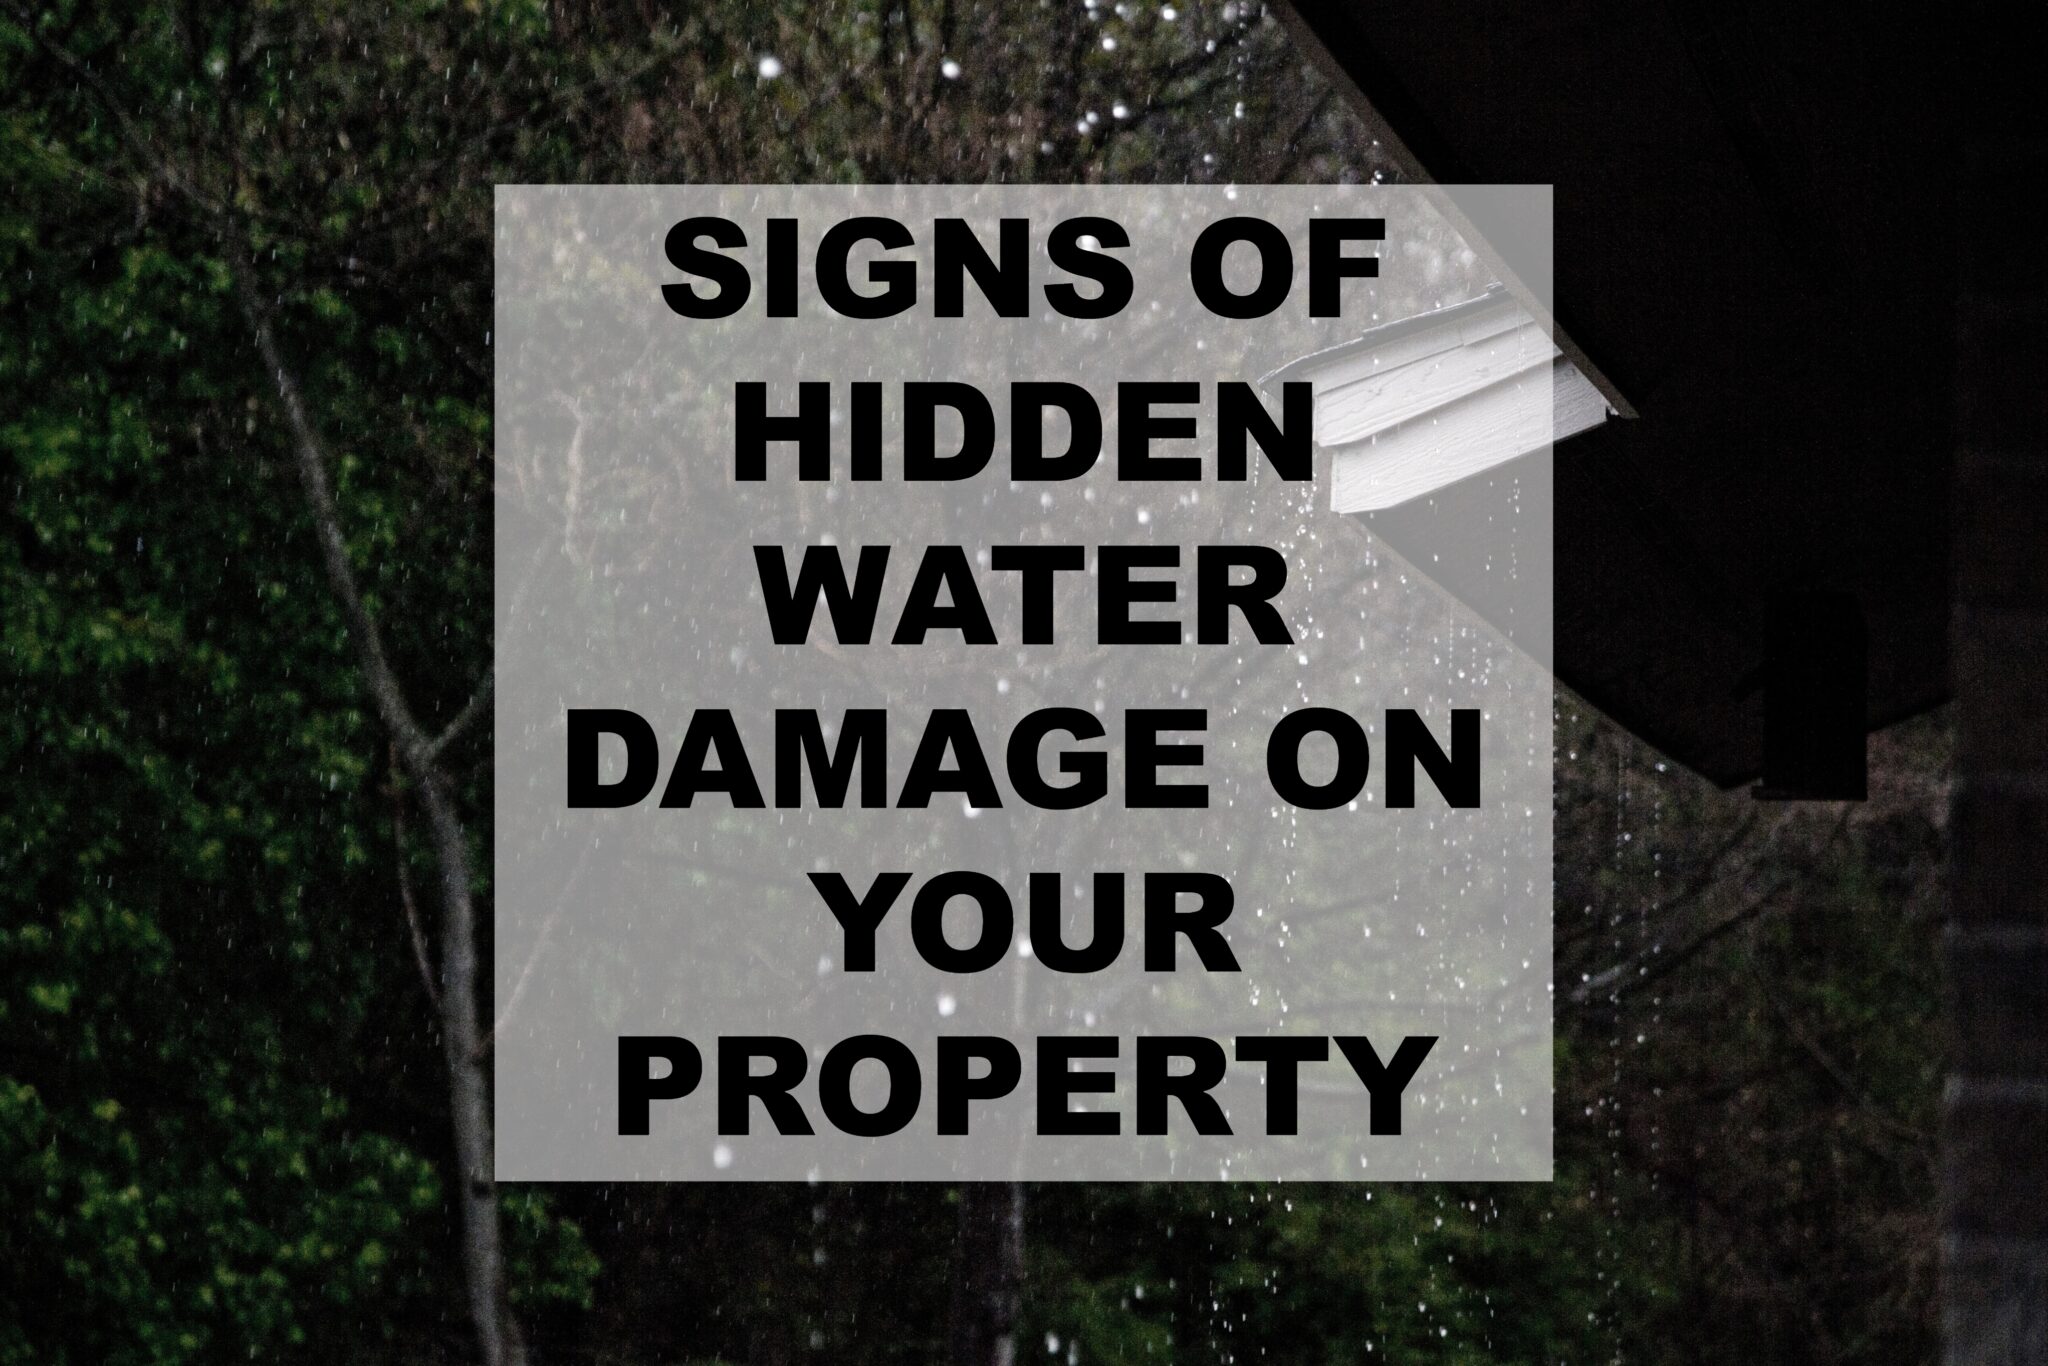 Signs of Hidden Water Damage on Your Property